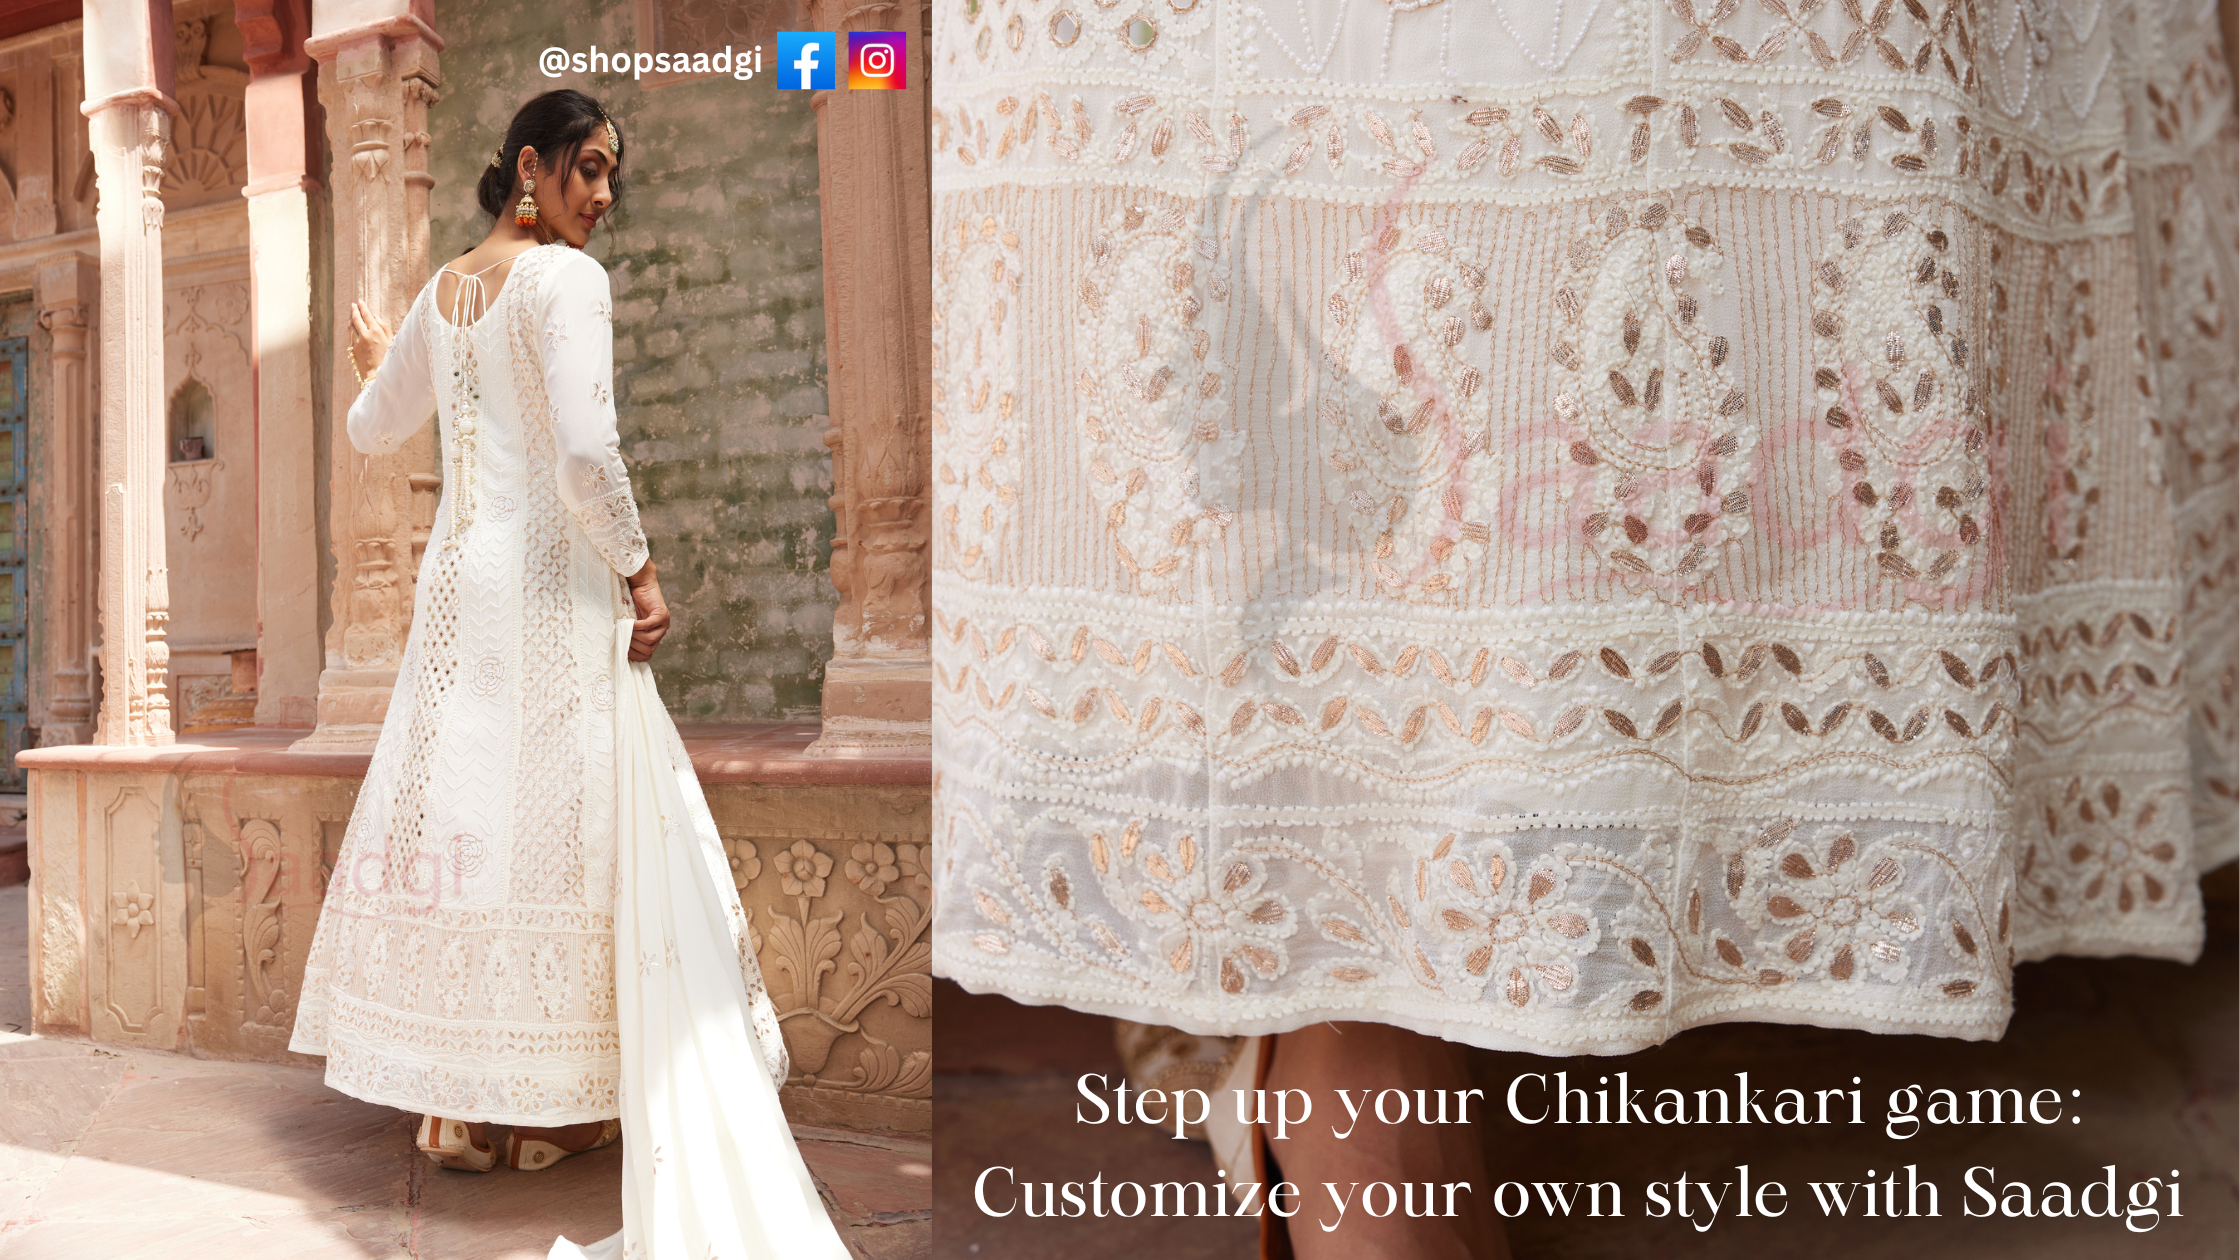 Step up your Chikankari game: Customize your own style with Saadgi